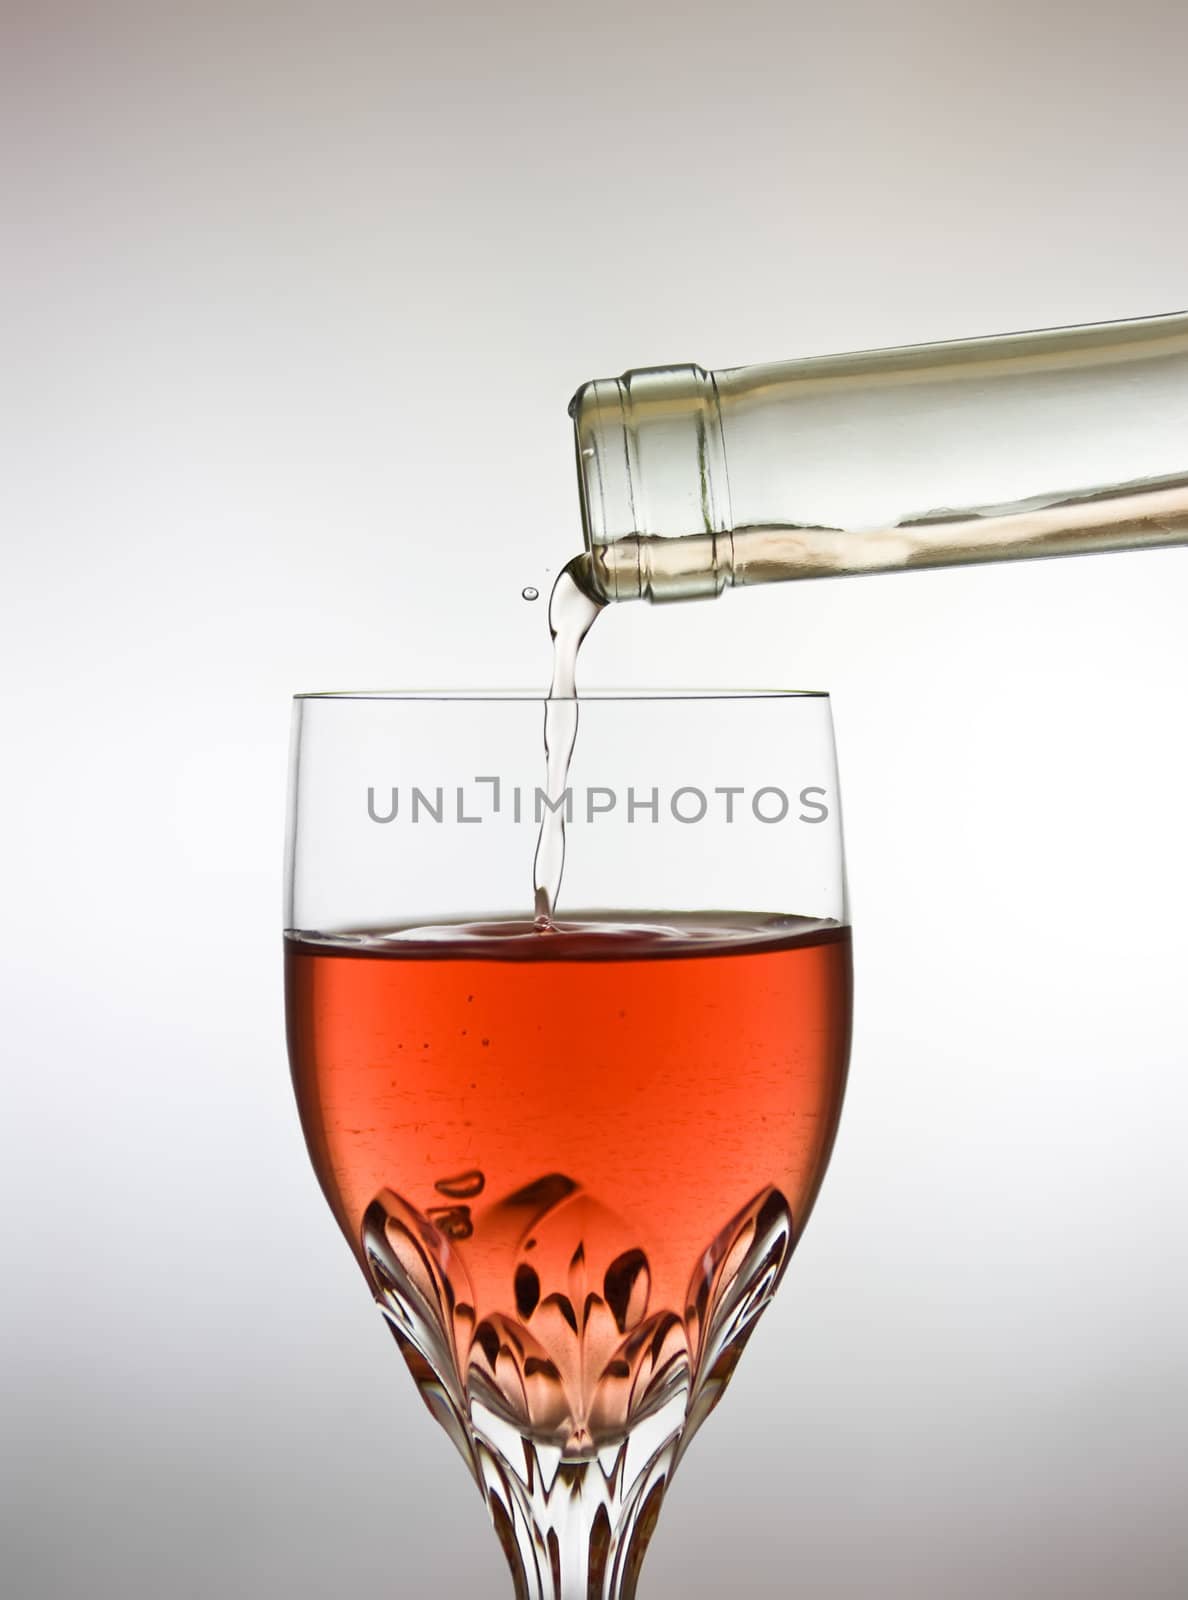 This image shows a glass of delicious red wine